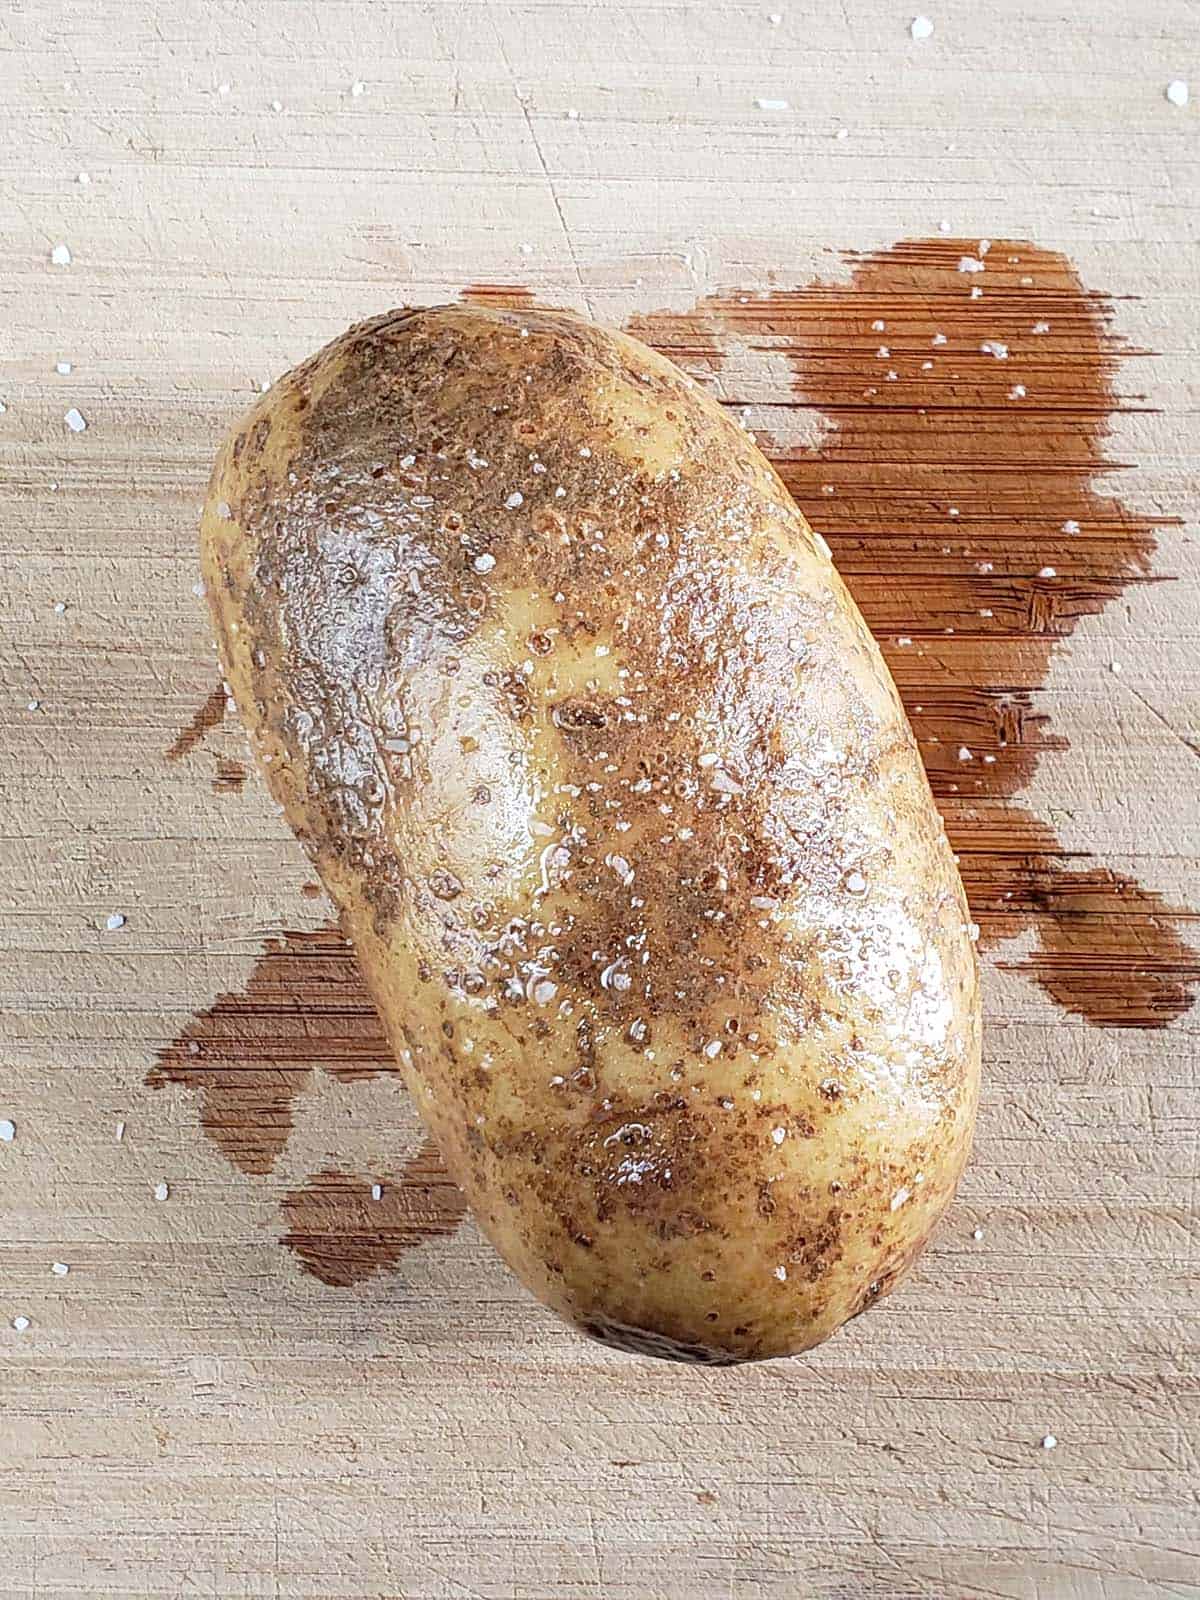 Baking potato rubbed with oil and sprinkled with salt on a cutting board.